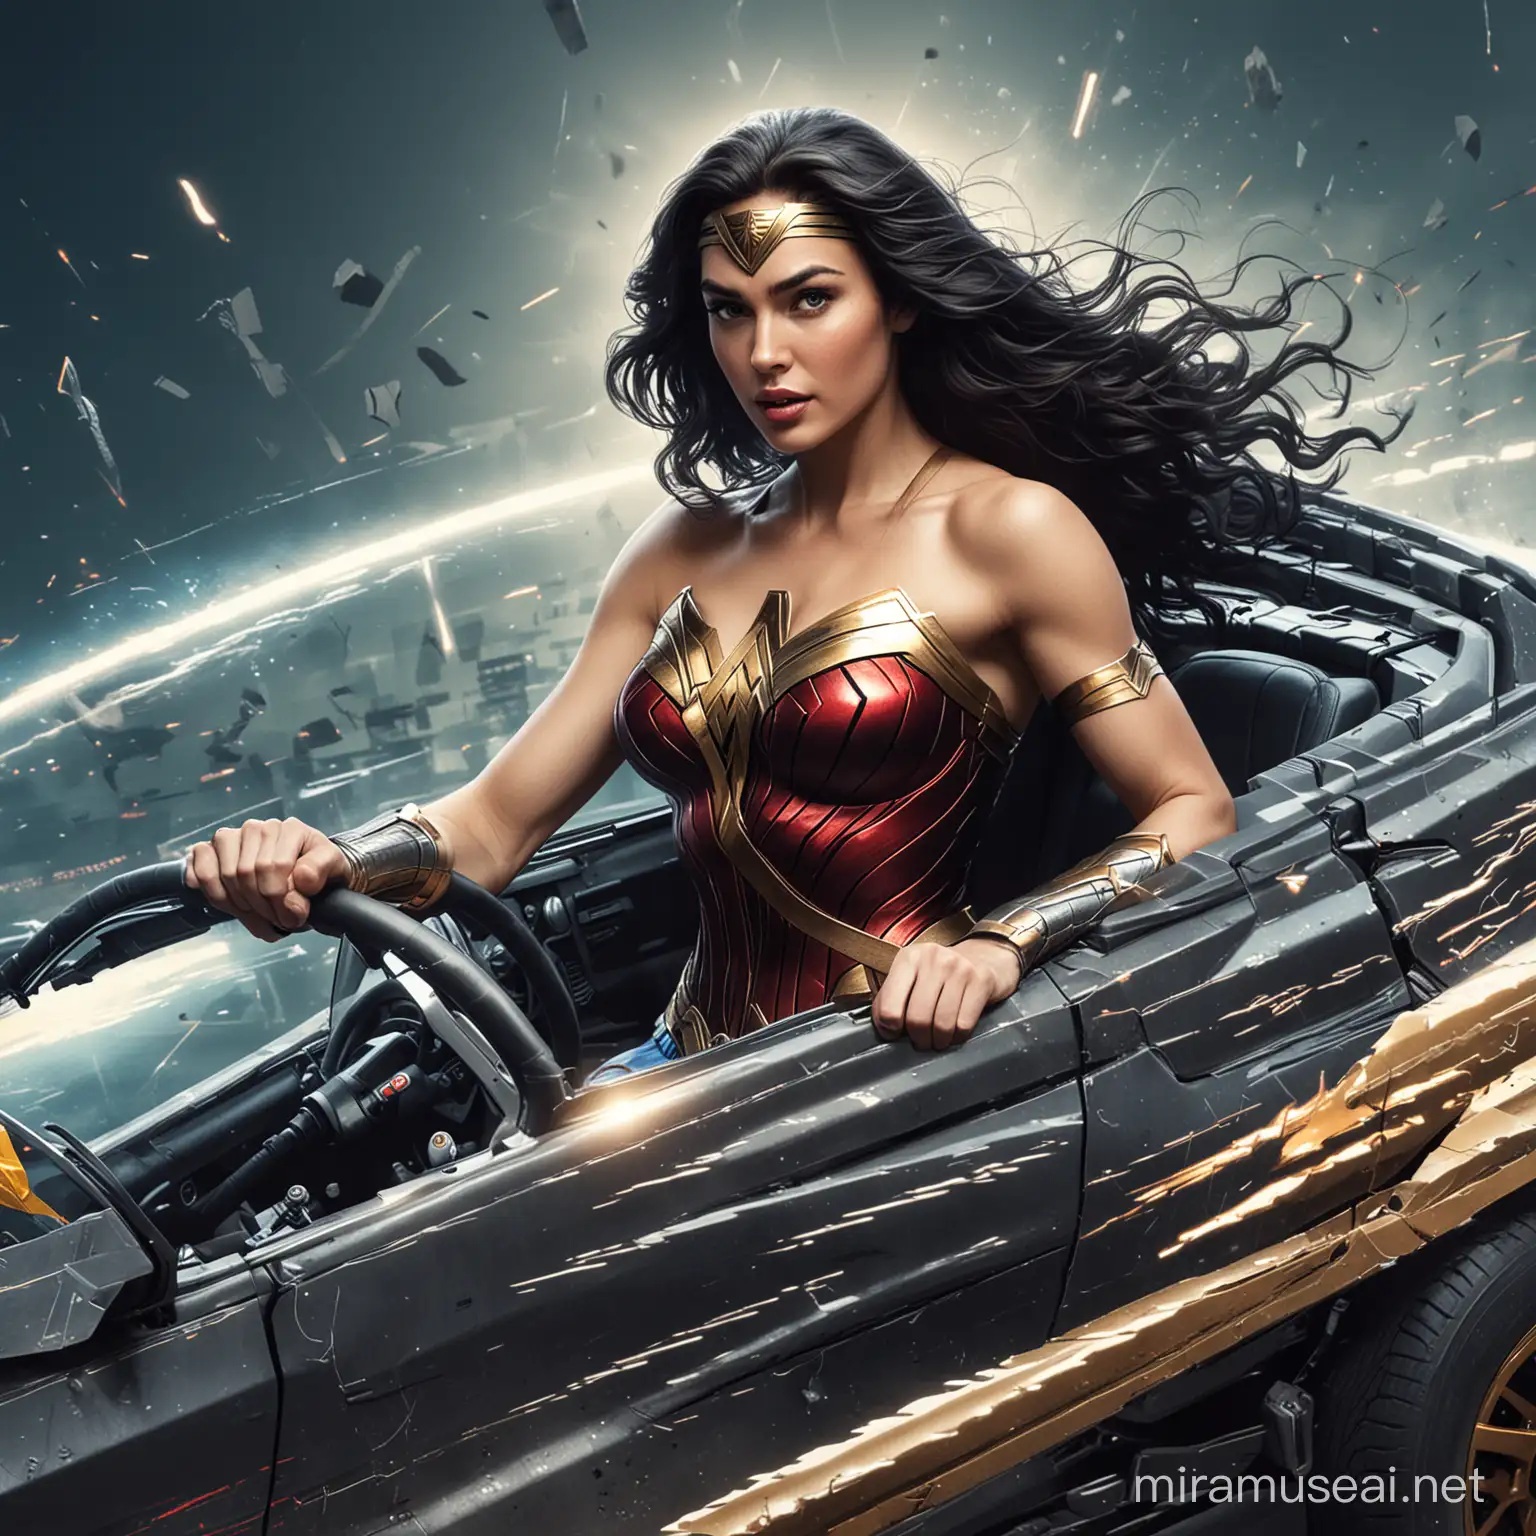 create a realistic wonder woman driving a car with a futuristic background. for screen printing